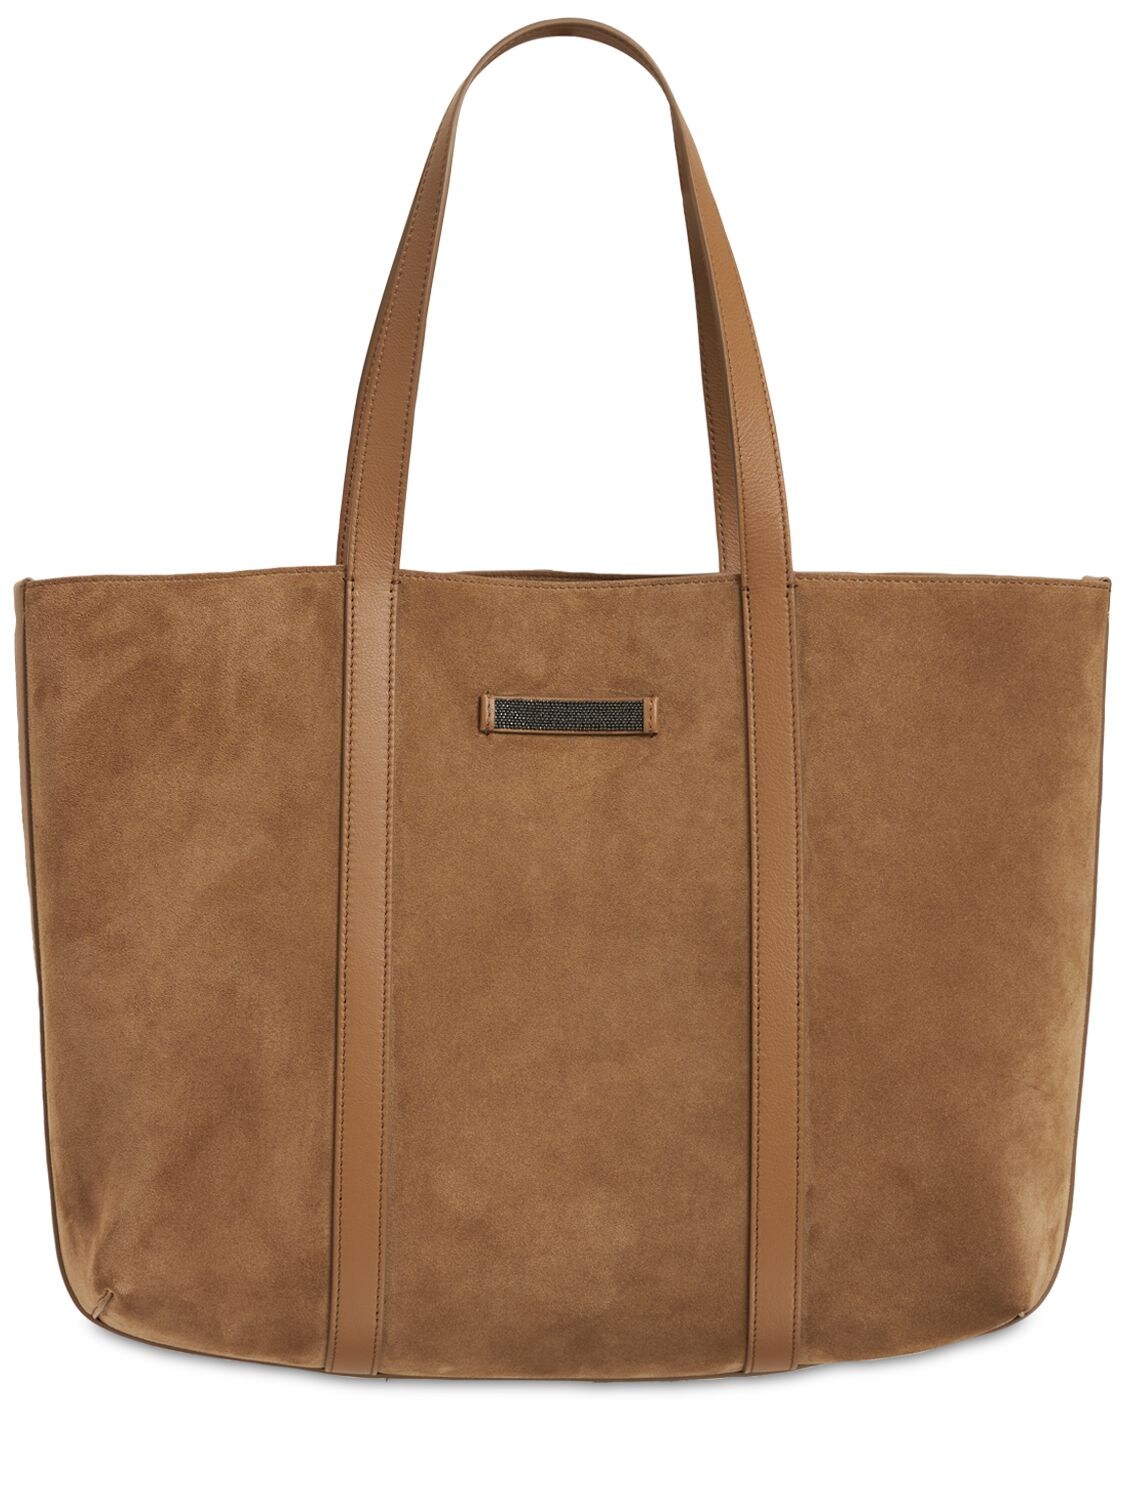 Reversible Suede Leather Tote Bag